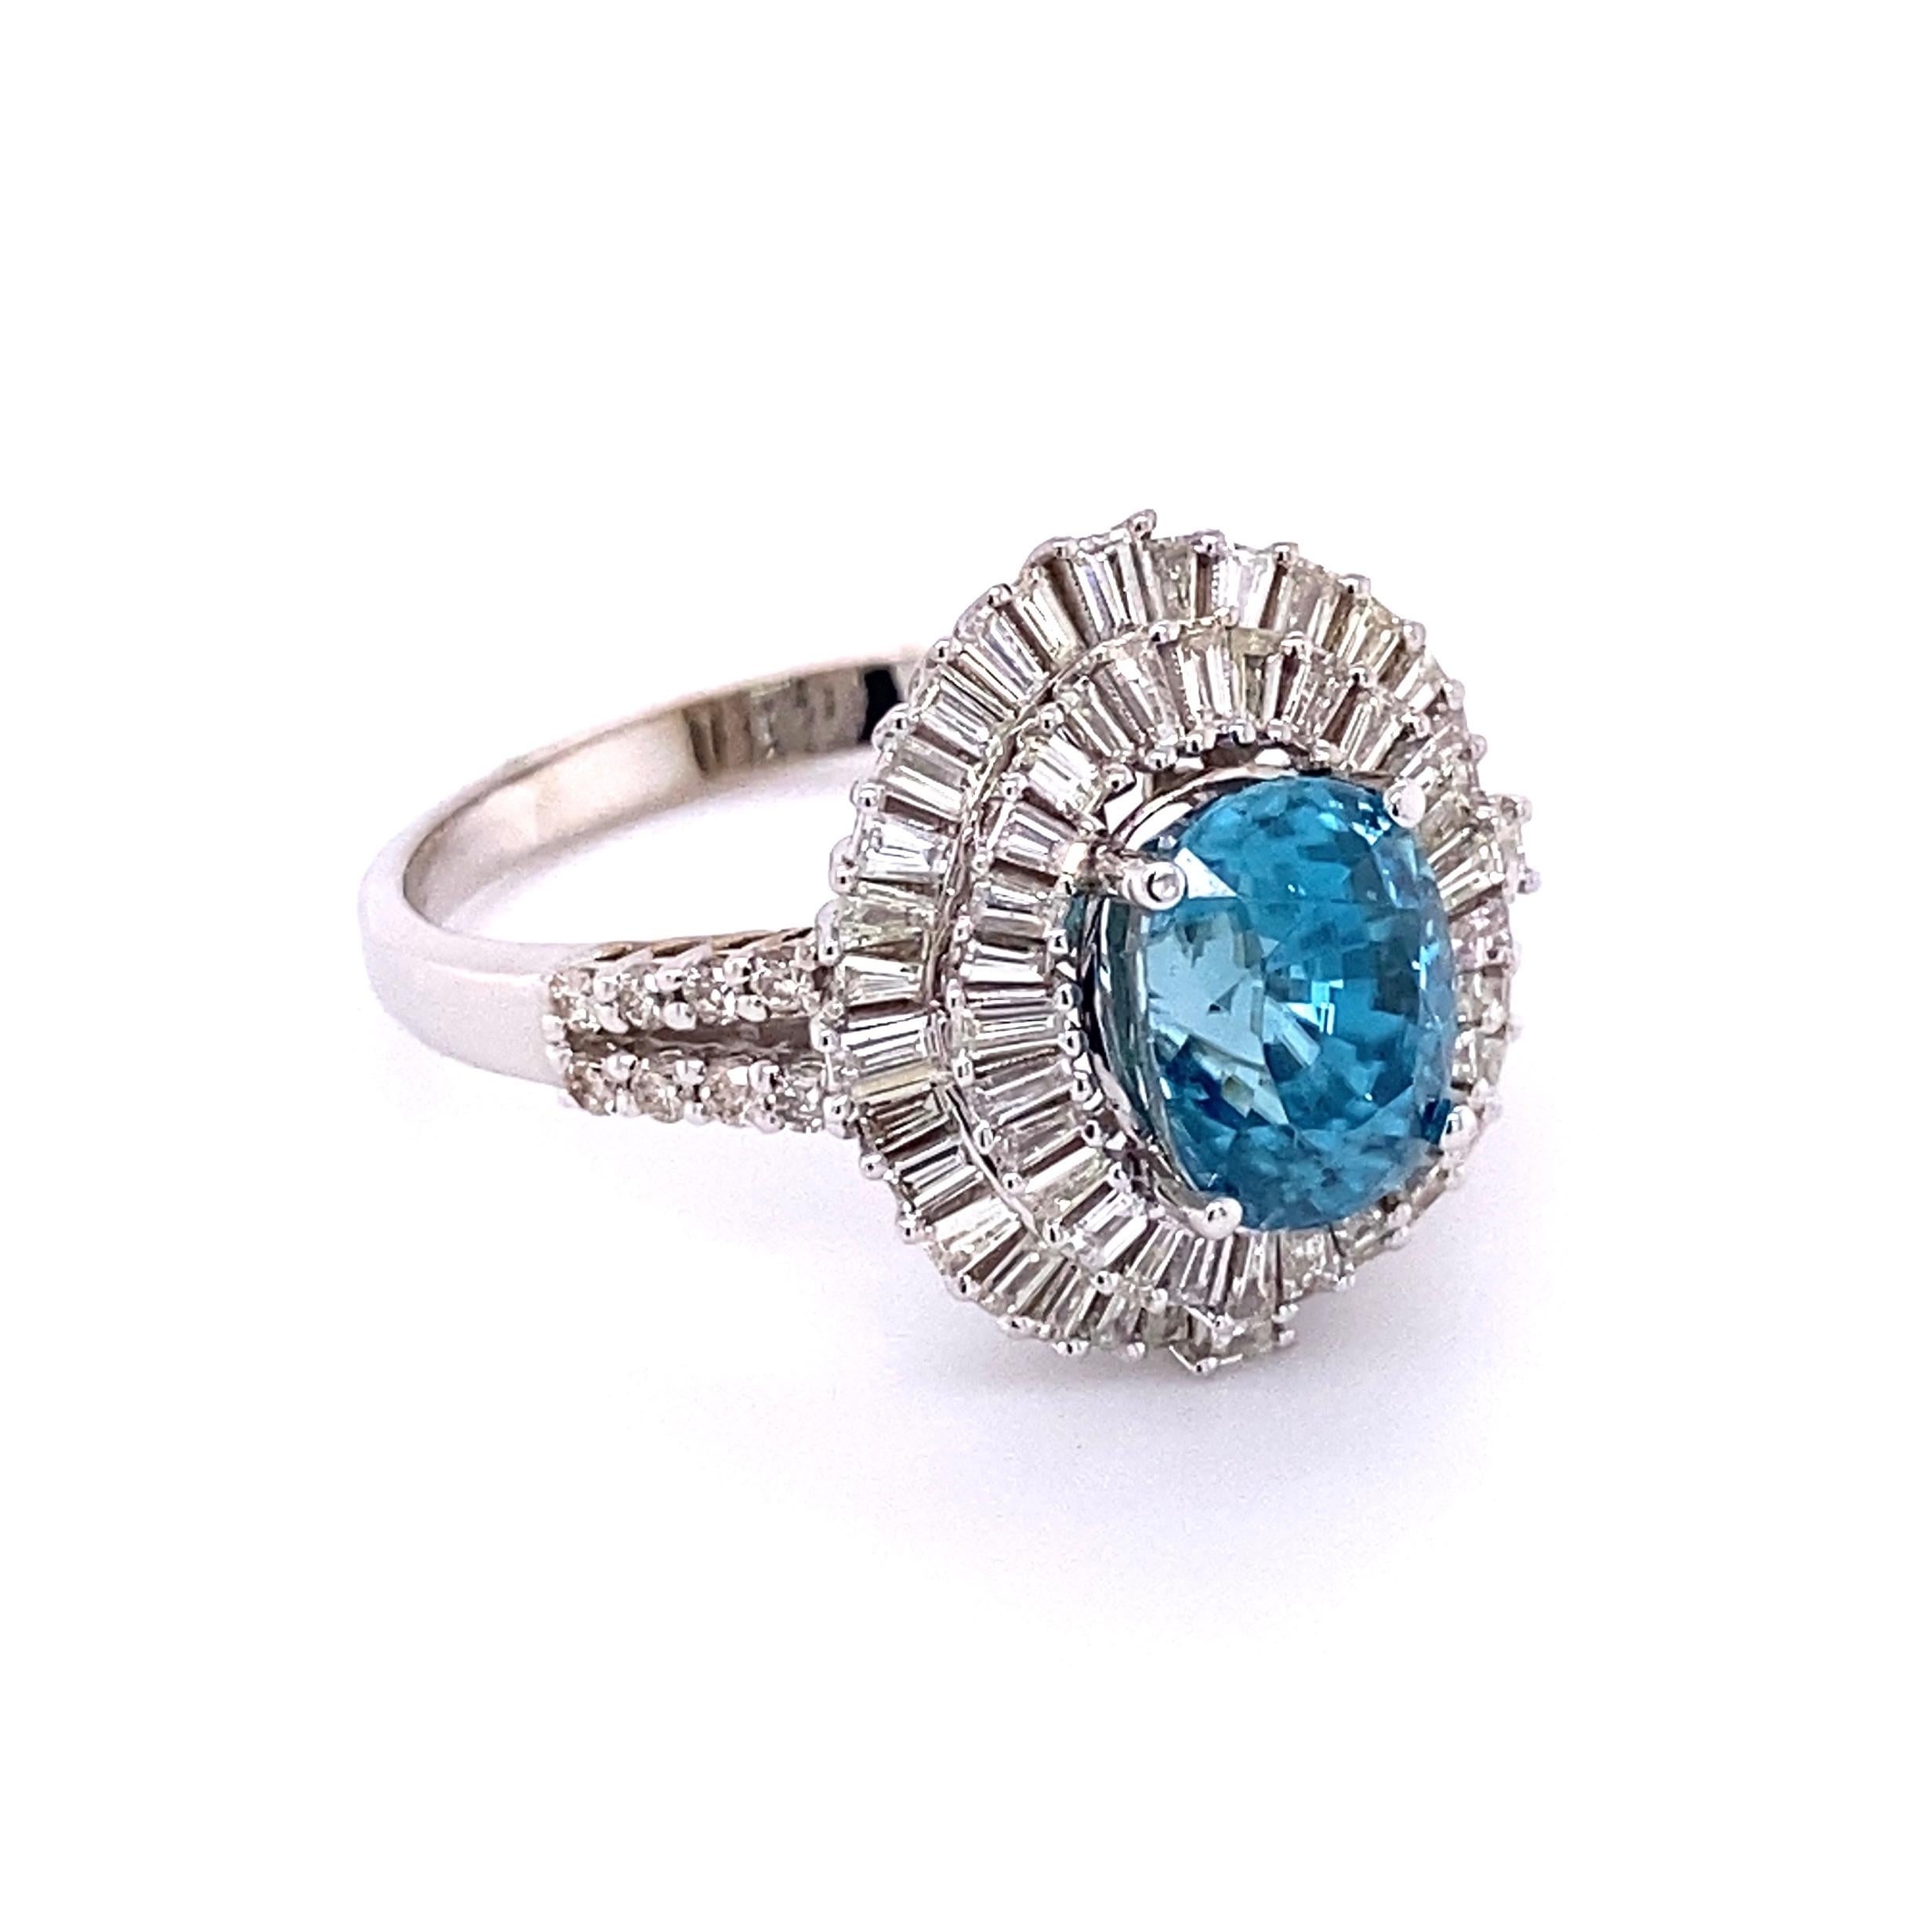 Simply Beautiful and finely detailed Blue Zircon and Diamond Cocktail Ring. Center securely set with an awesome 5.24 Carat Blue Zircon surrounded by Baguette Diamonds and round diamonds on either side of shank. Diamonds weighing approx. 1.66tcw.